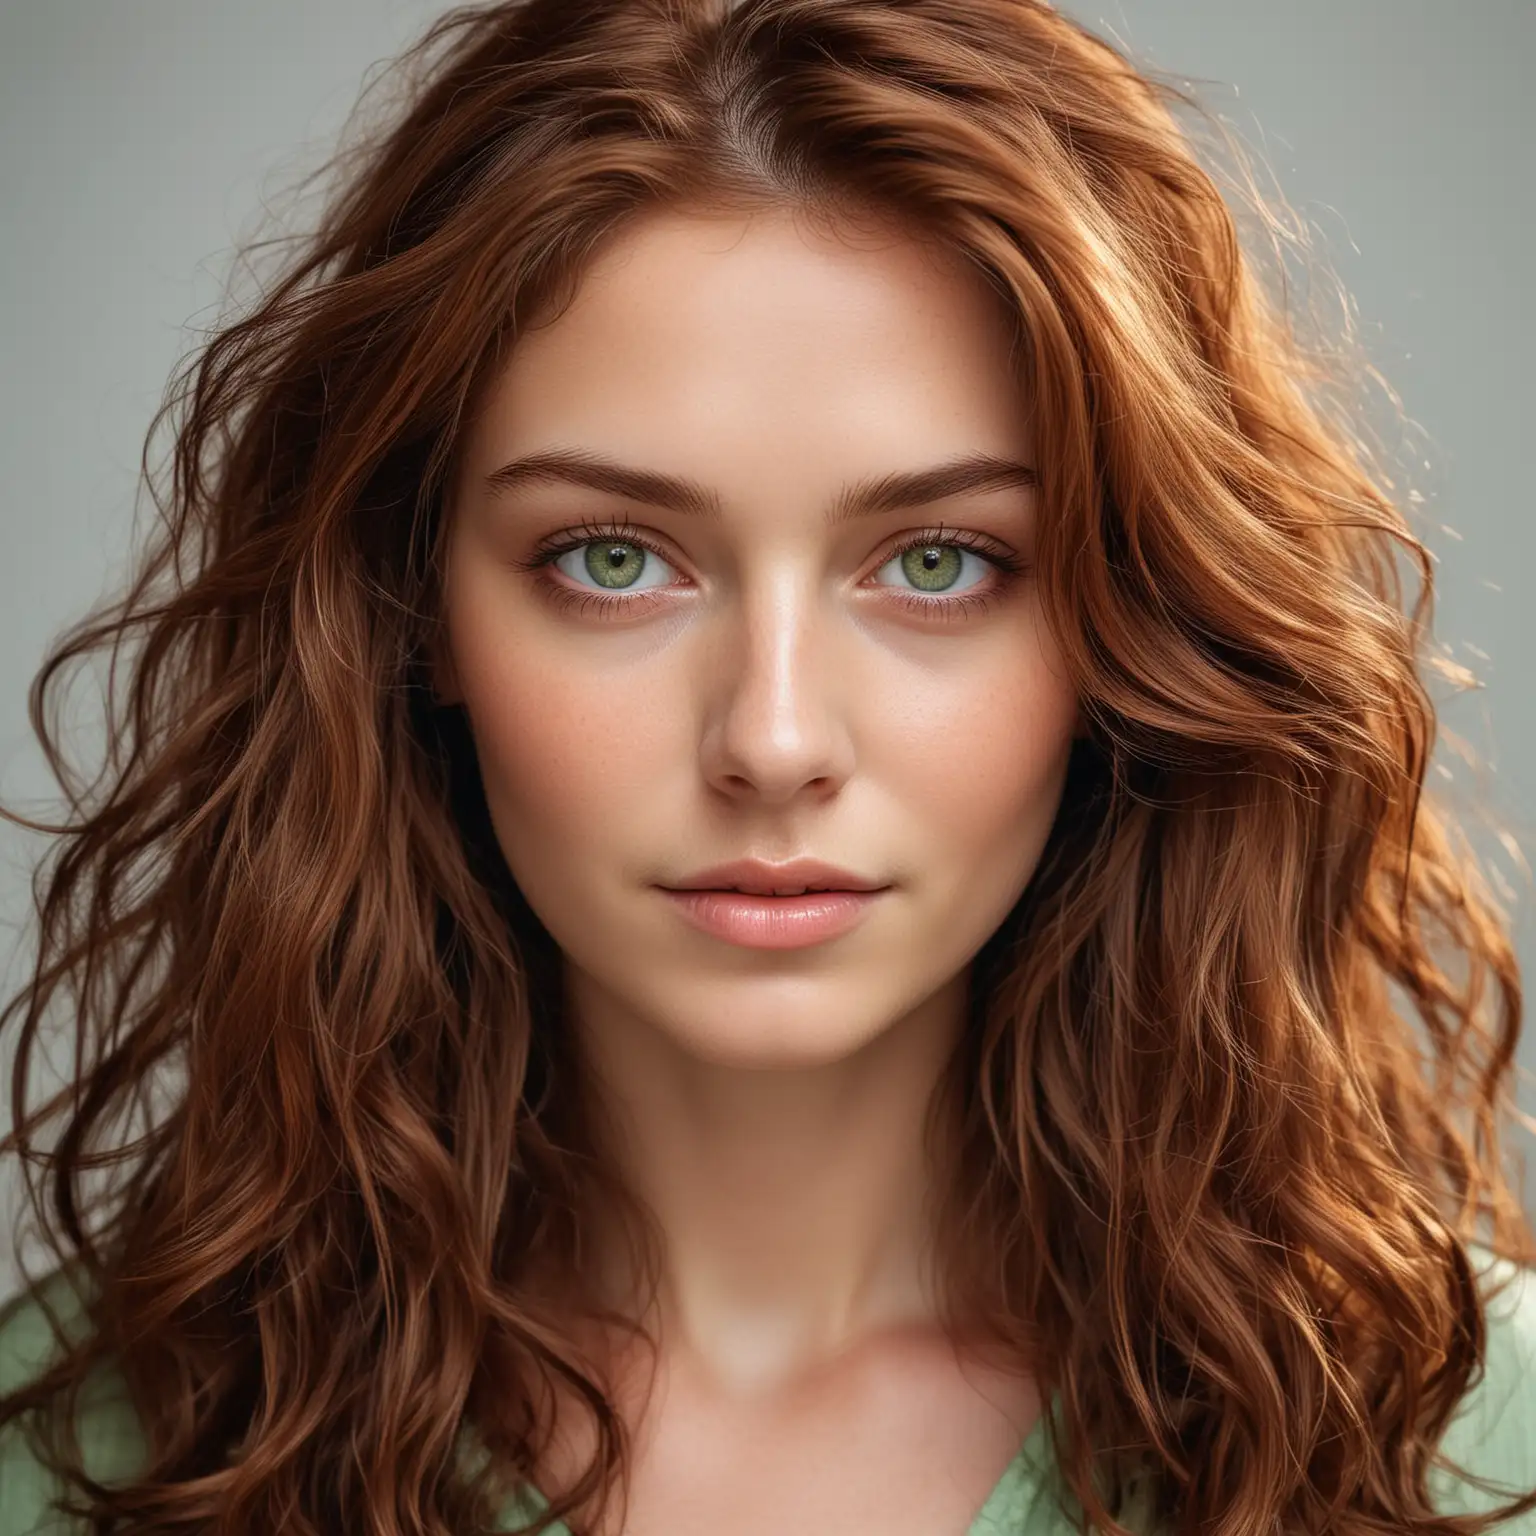 Portrait Gentle Attraction Woman with ReddishBrown Hair and Green Eyes